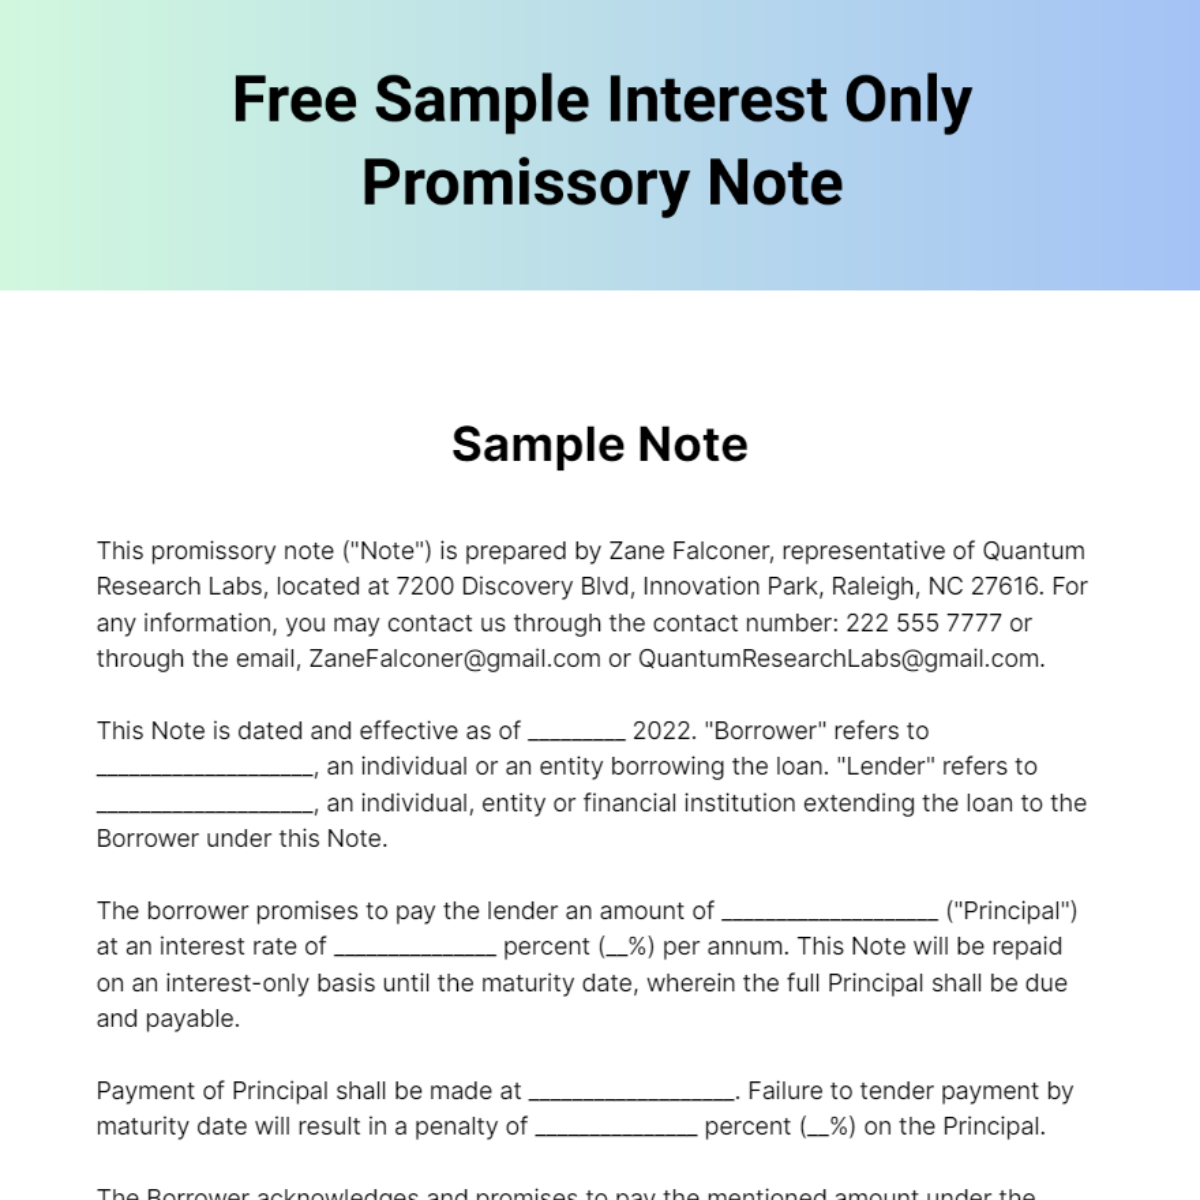 Free Sample Interest Only Promissory Note Template